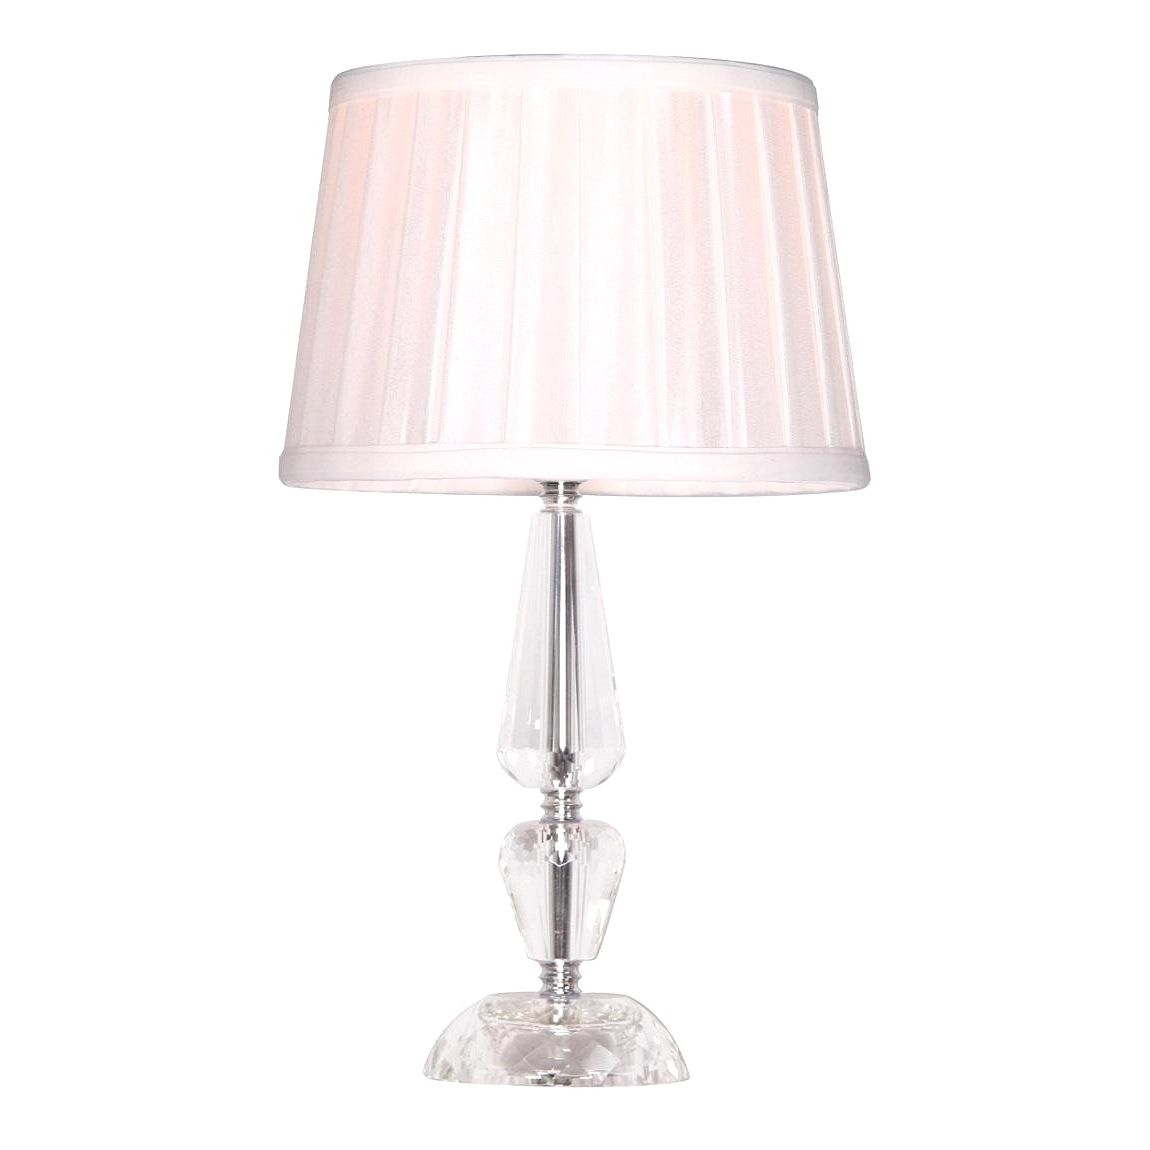 Debenhams Table Lamps For Living Room With Regard To Well Known Gallery Debenhams Table Lamps – Badotcom (View 10 of 15)